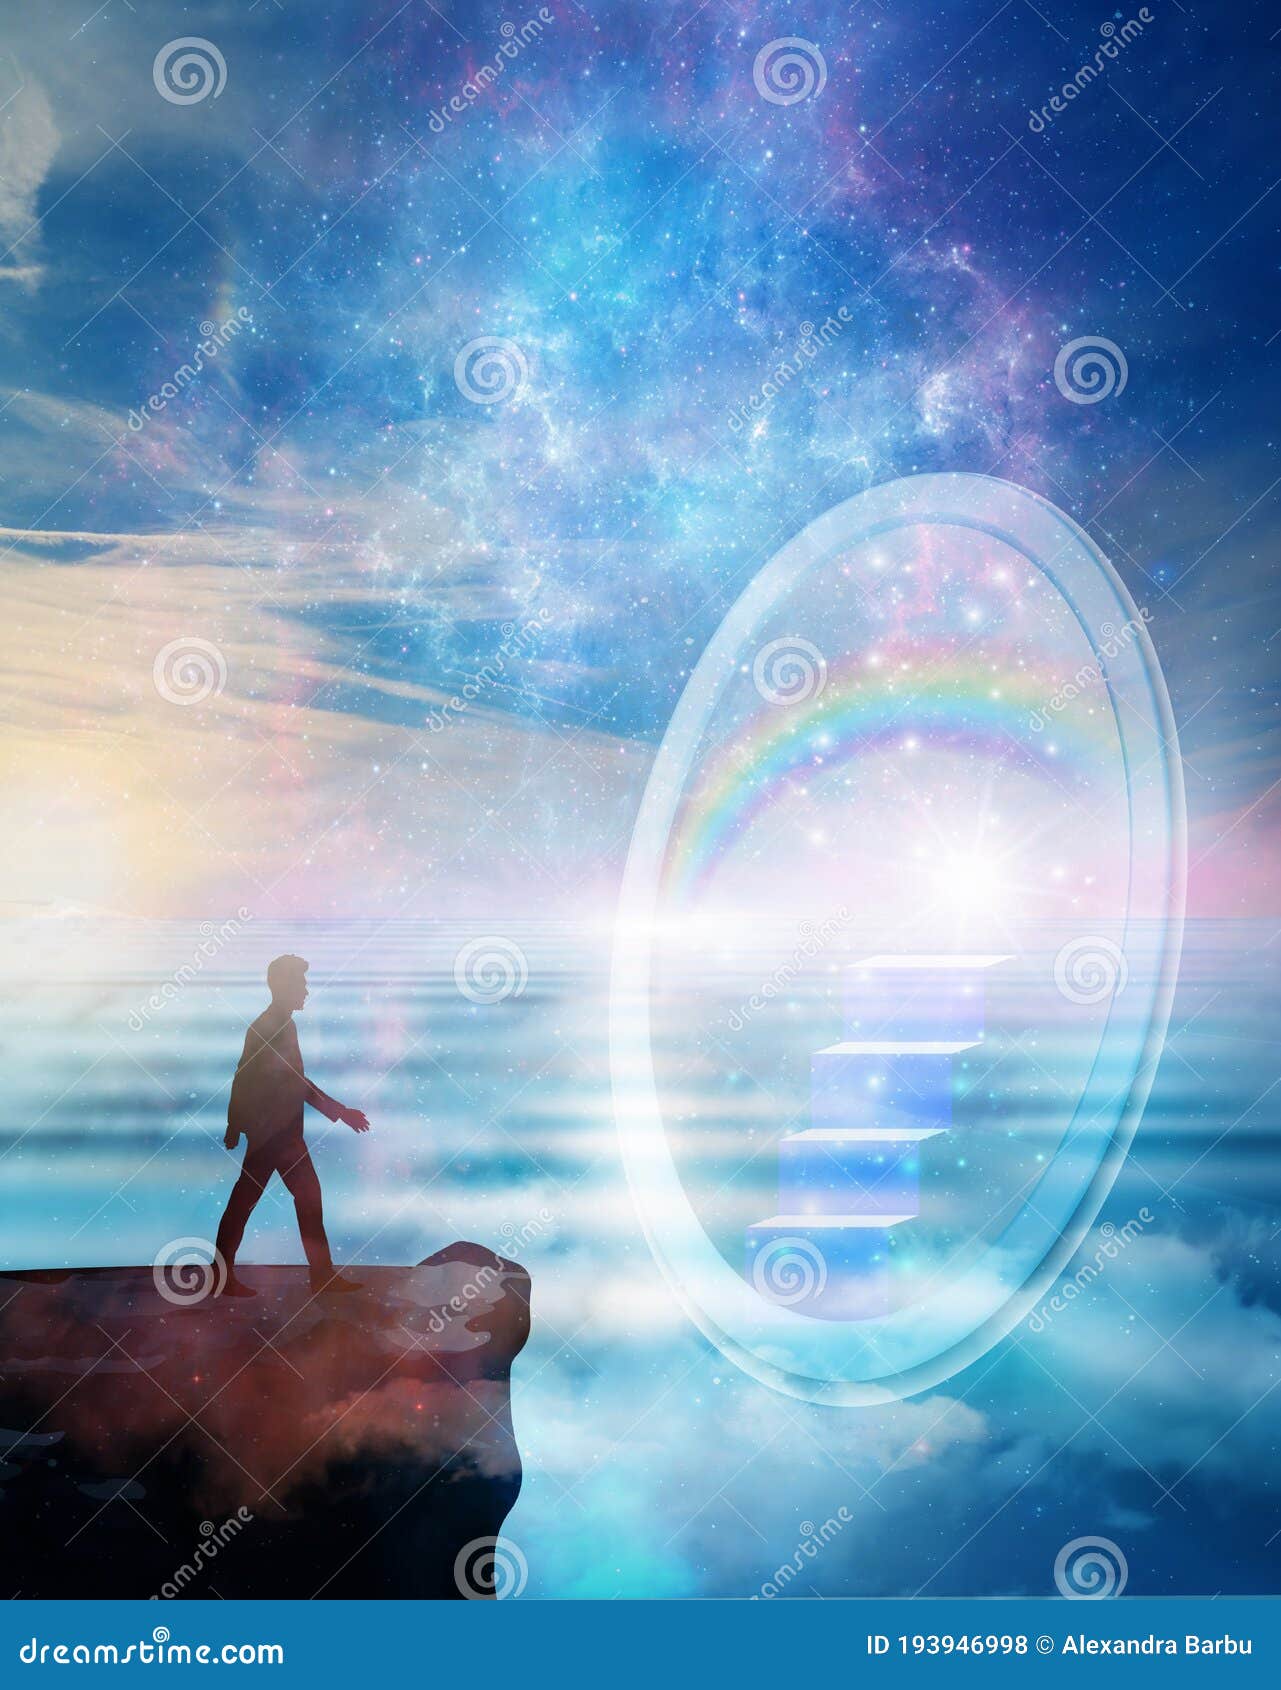 soul journey, divine angelic guidance, portal to another universe, new life, new world, reality wallpaper